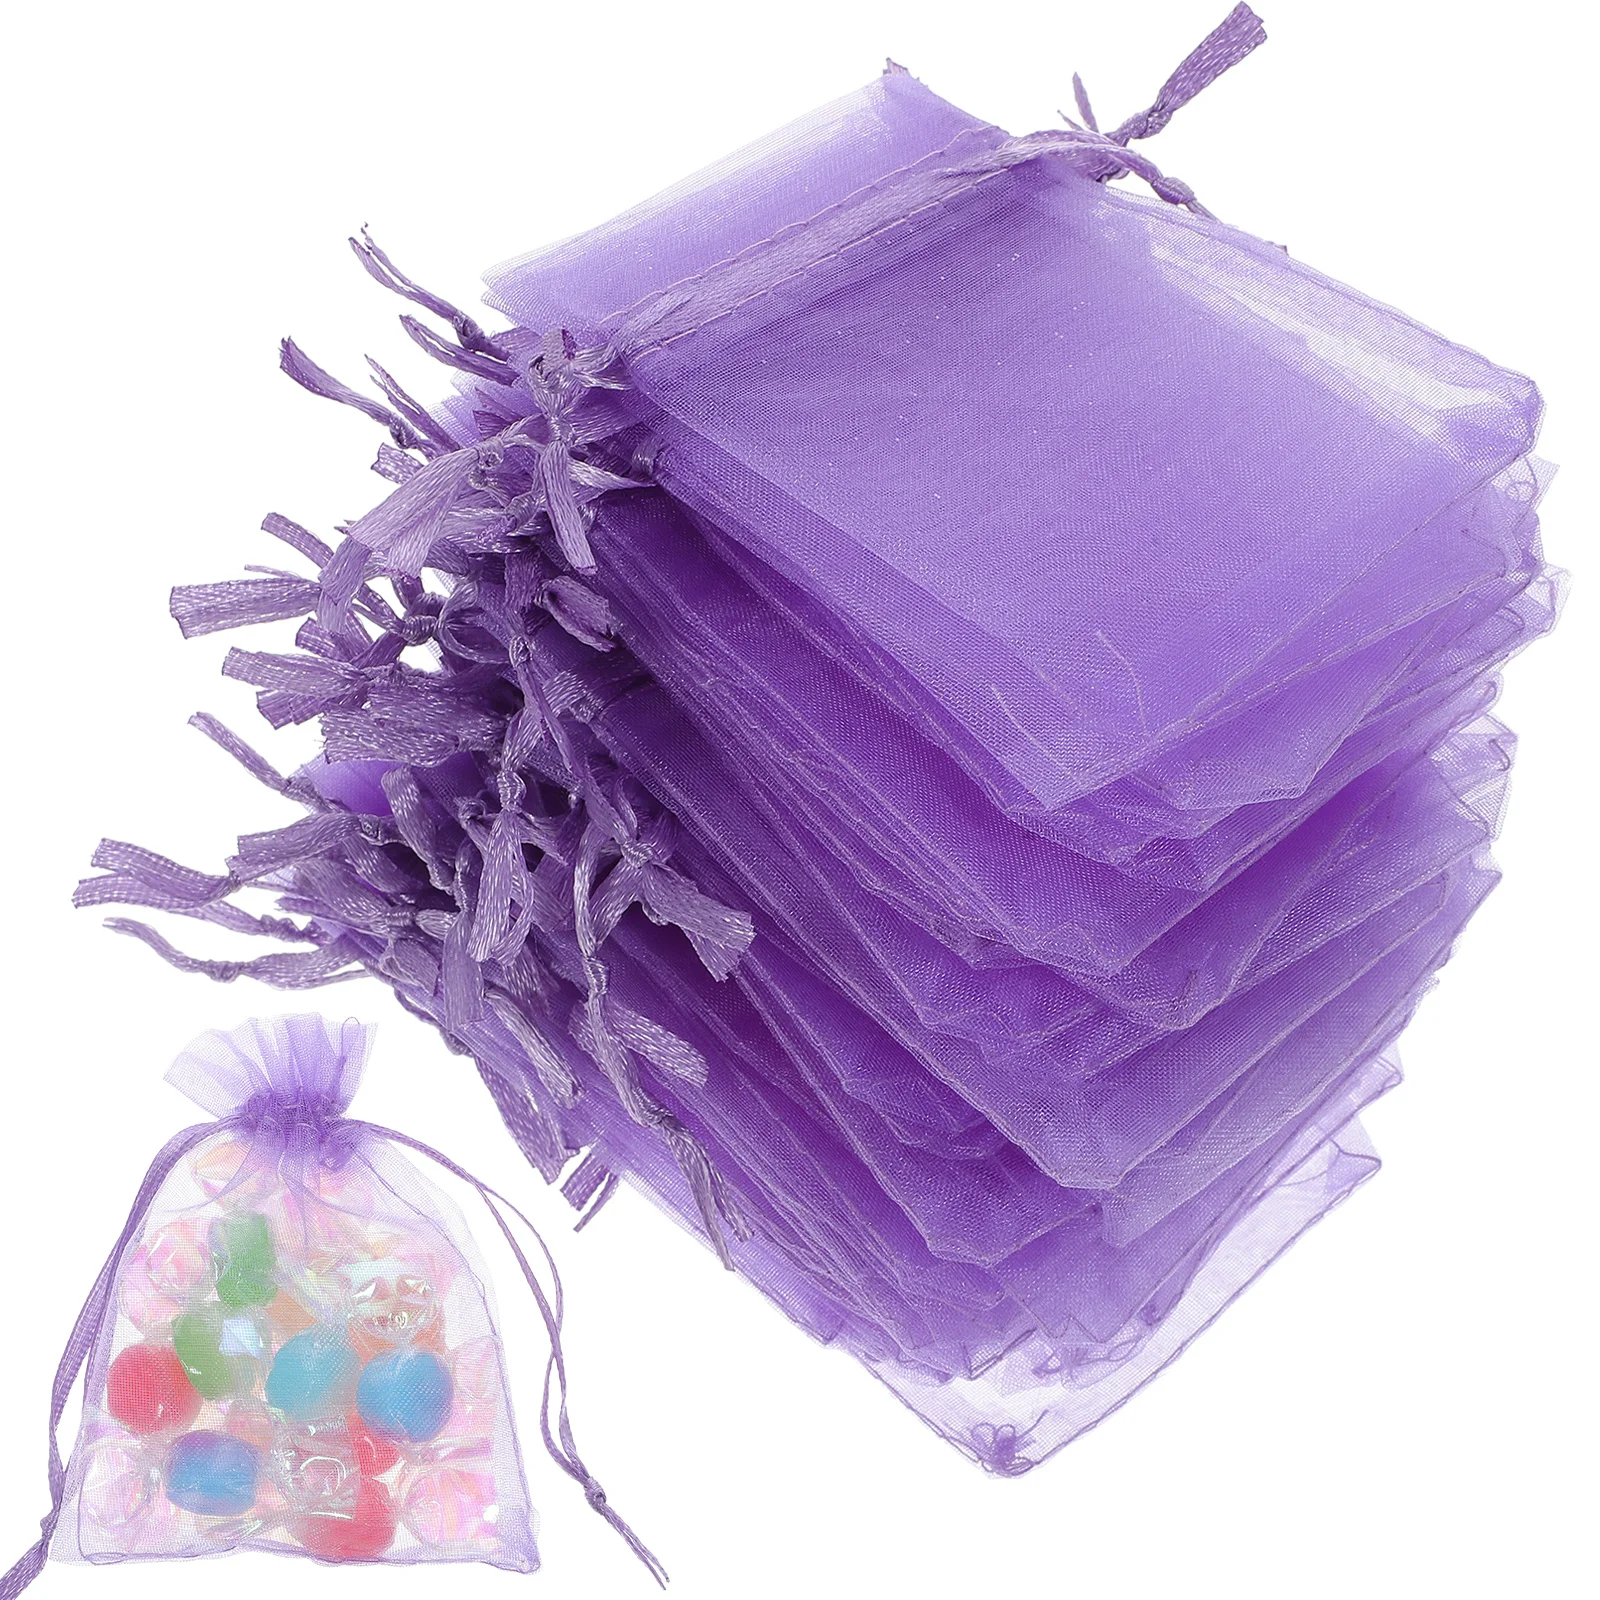 

50 Pcs Mini Gifts Organza Bag Drawstring Bags Design Candy Small Jewelries Wrapping Purple Packing